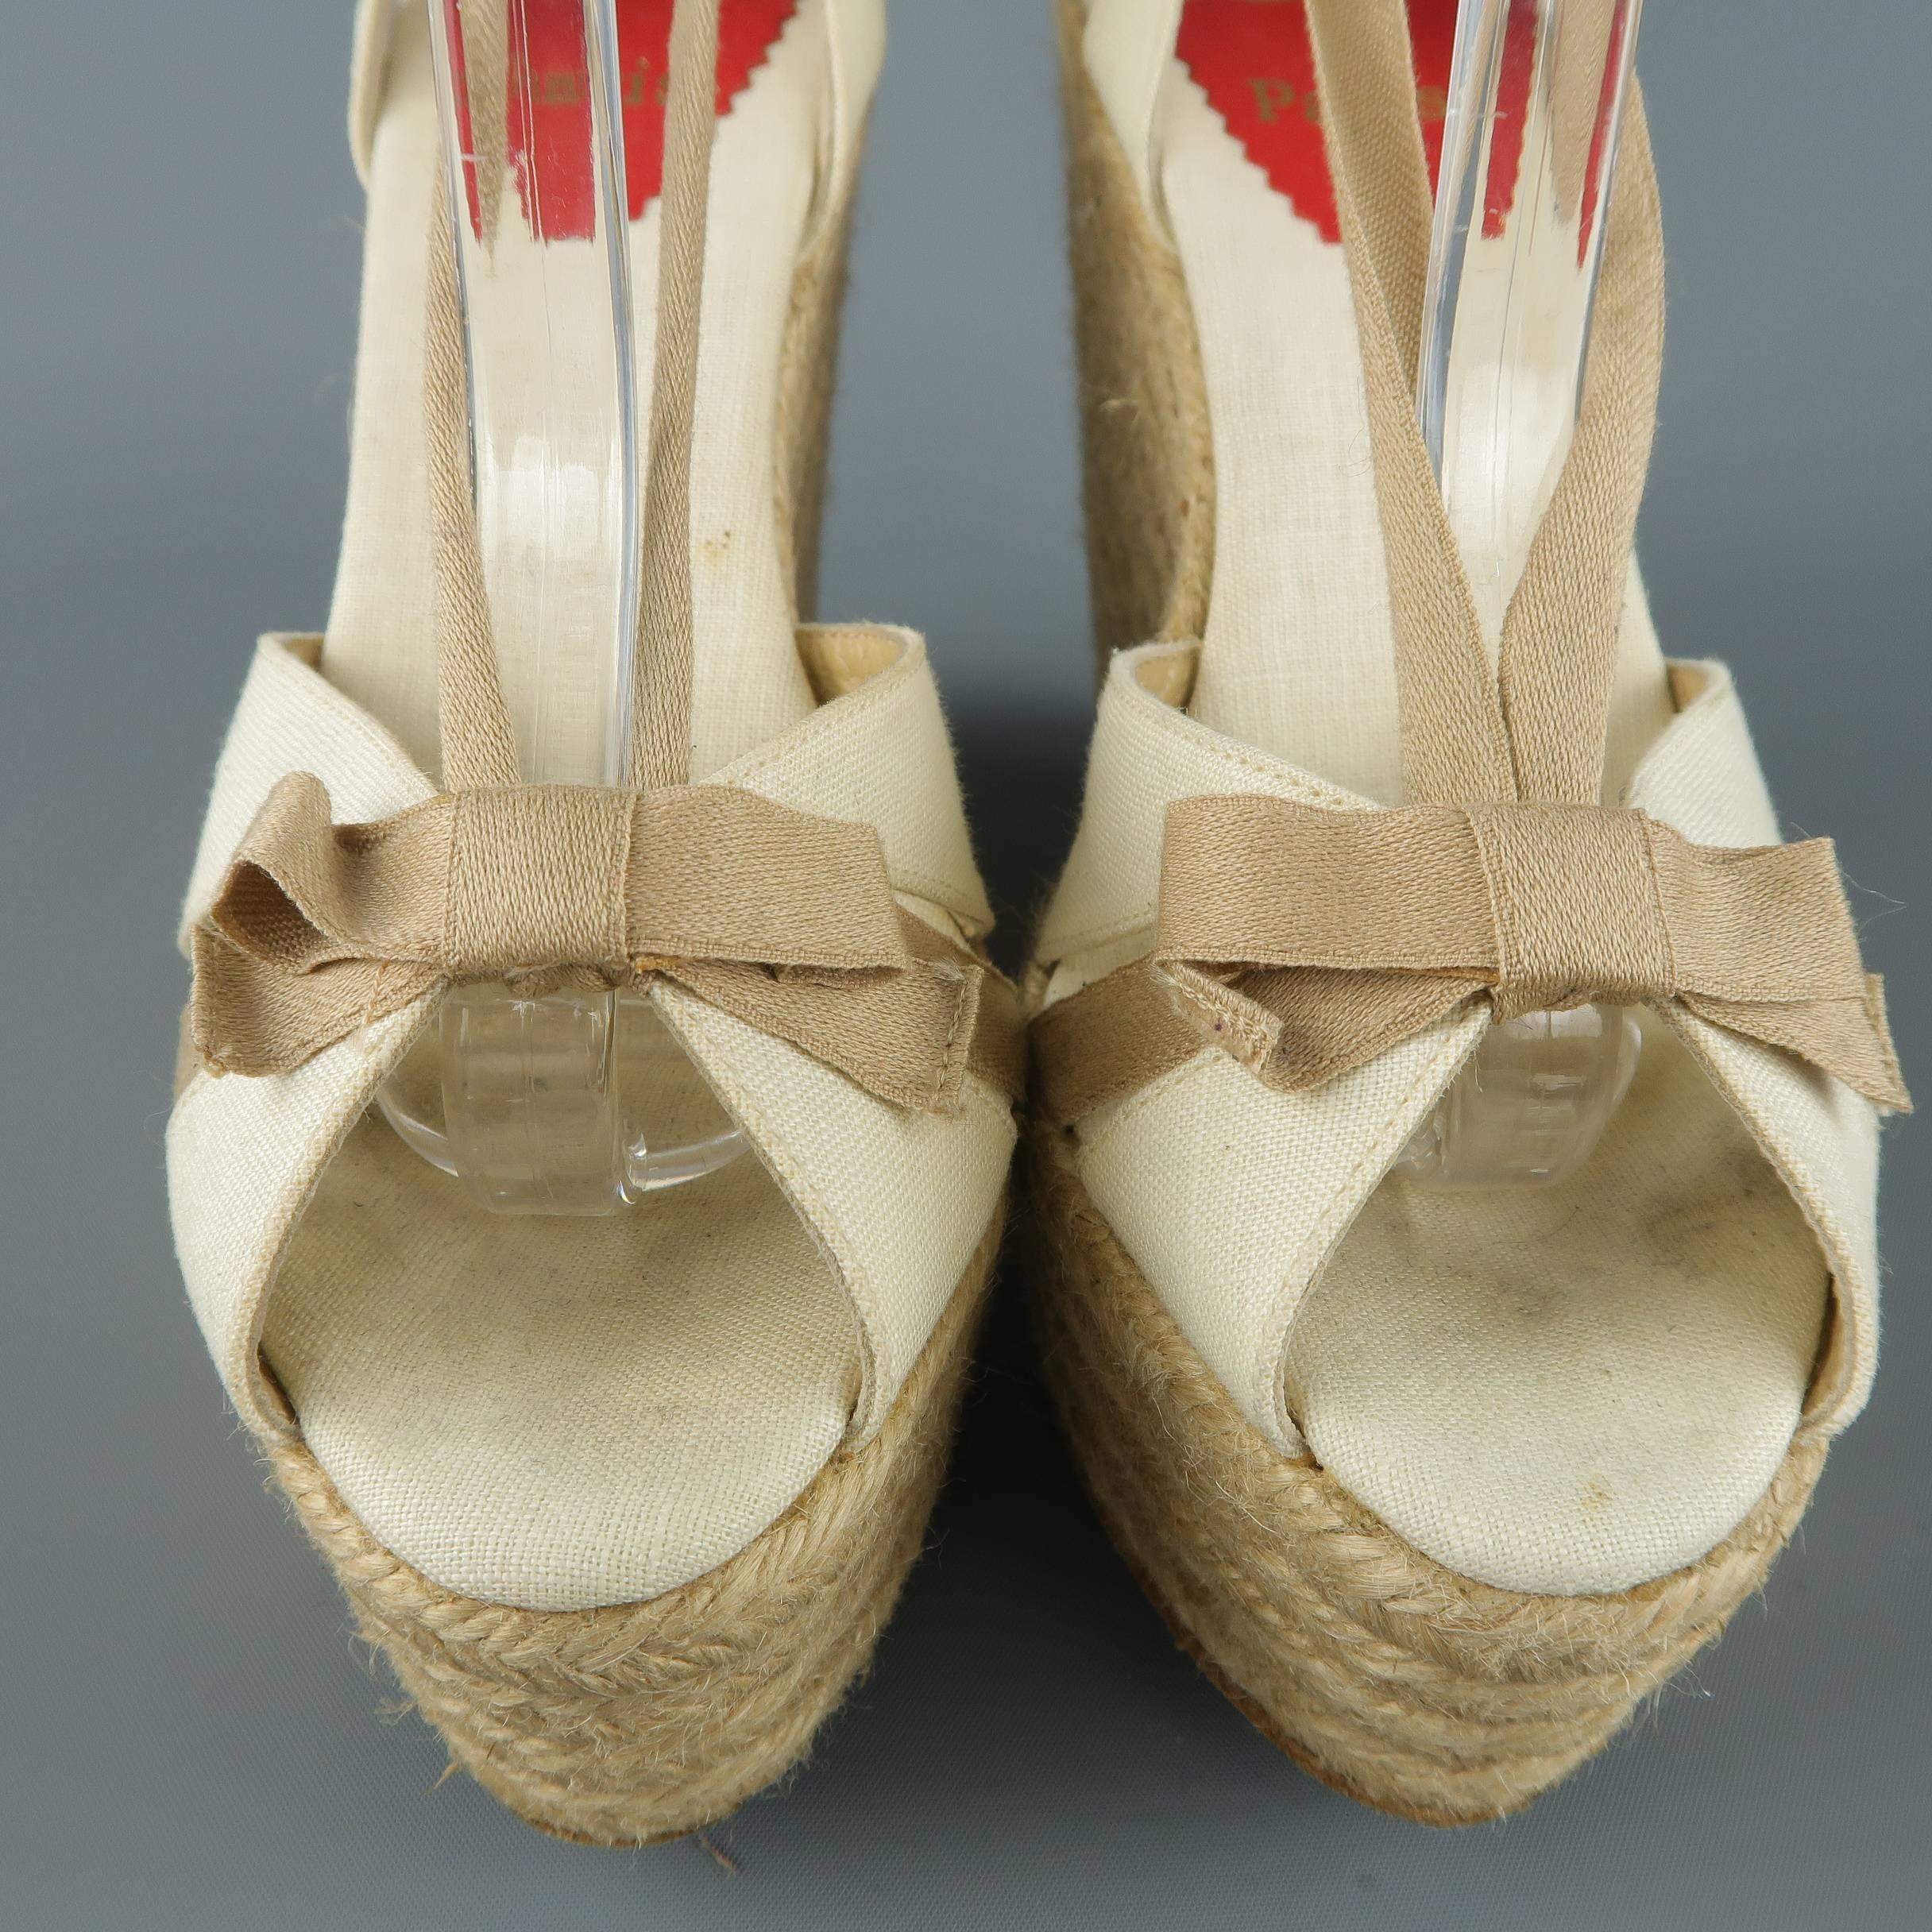 CHRISTIAN LOUBOUTIN sandals come in cream and beige fabric with a bow detailed peep toe, sling back, tied ankle strap, and woven espadrille platform wedge. Resoled.
 
Good Pre-Owned Condition.
Marked: (no size)
 
Measurements:
 
Heel: 5